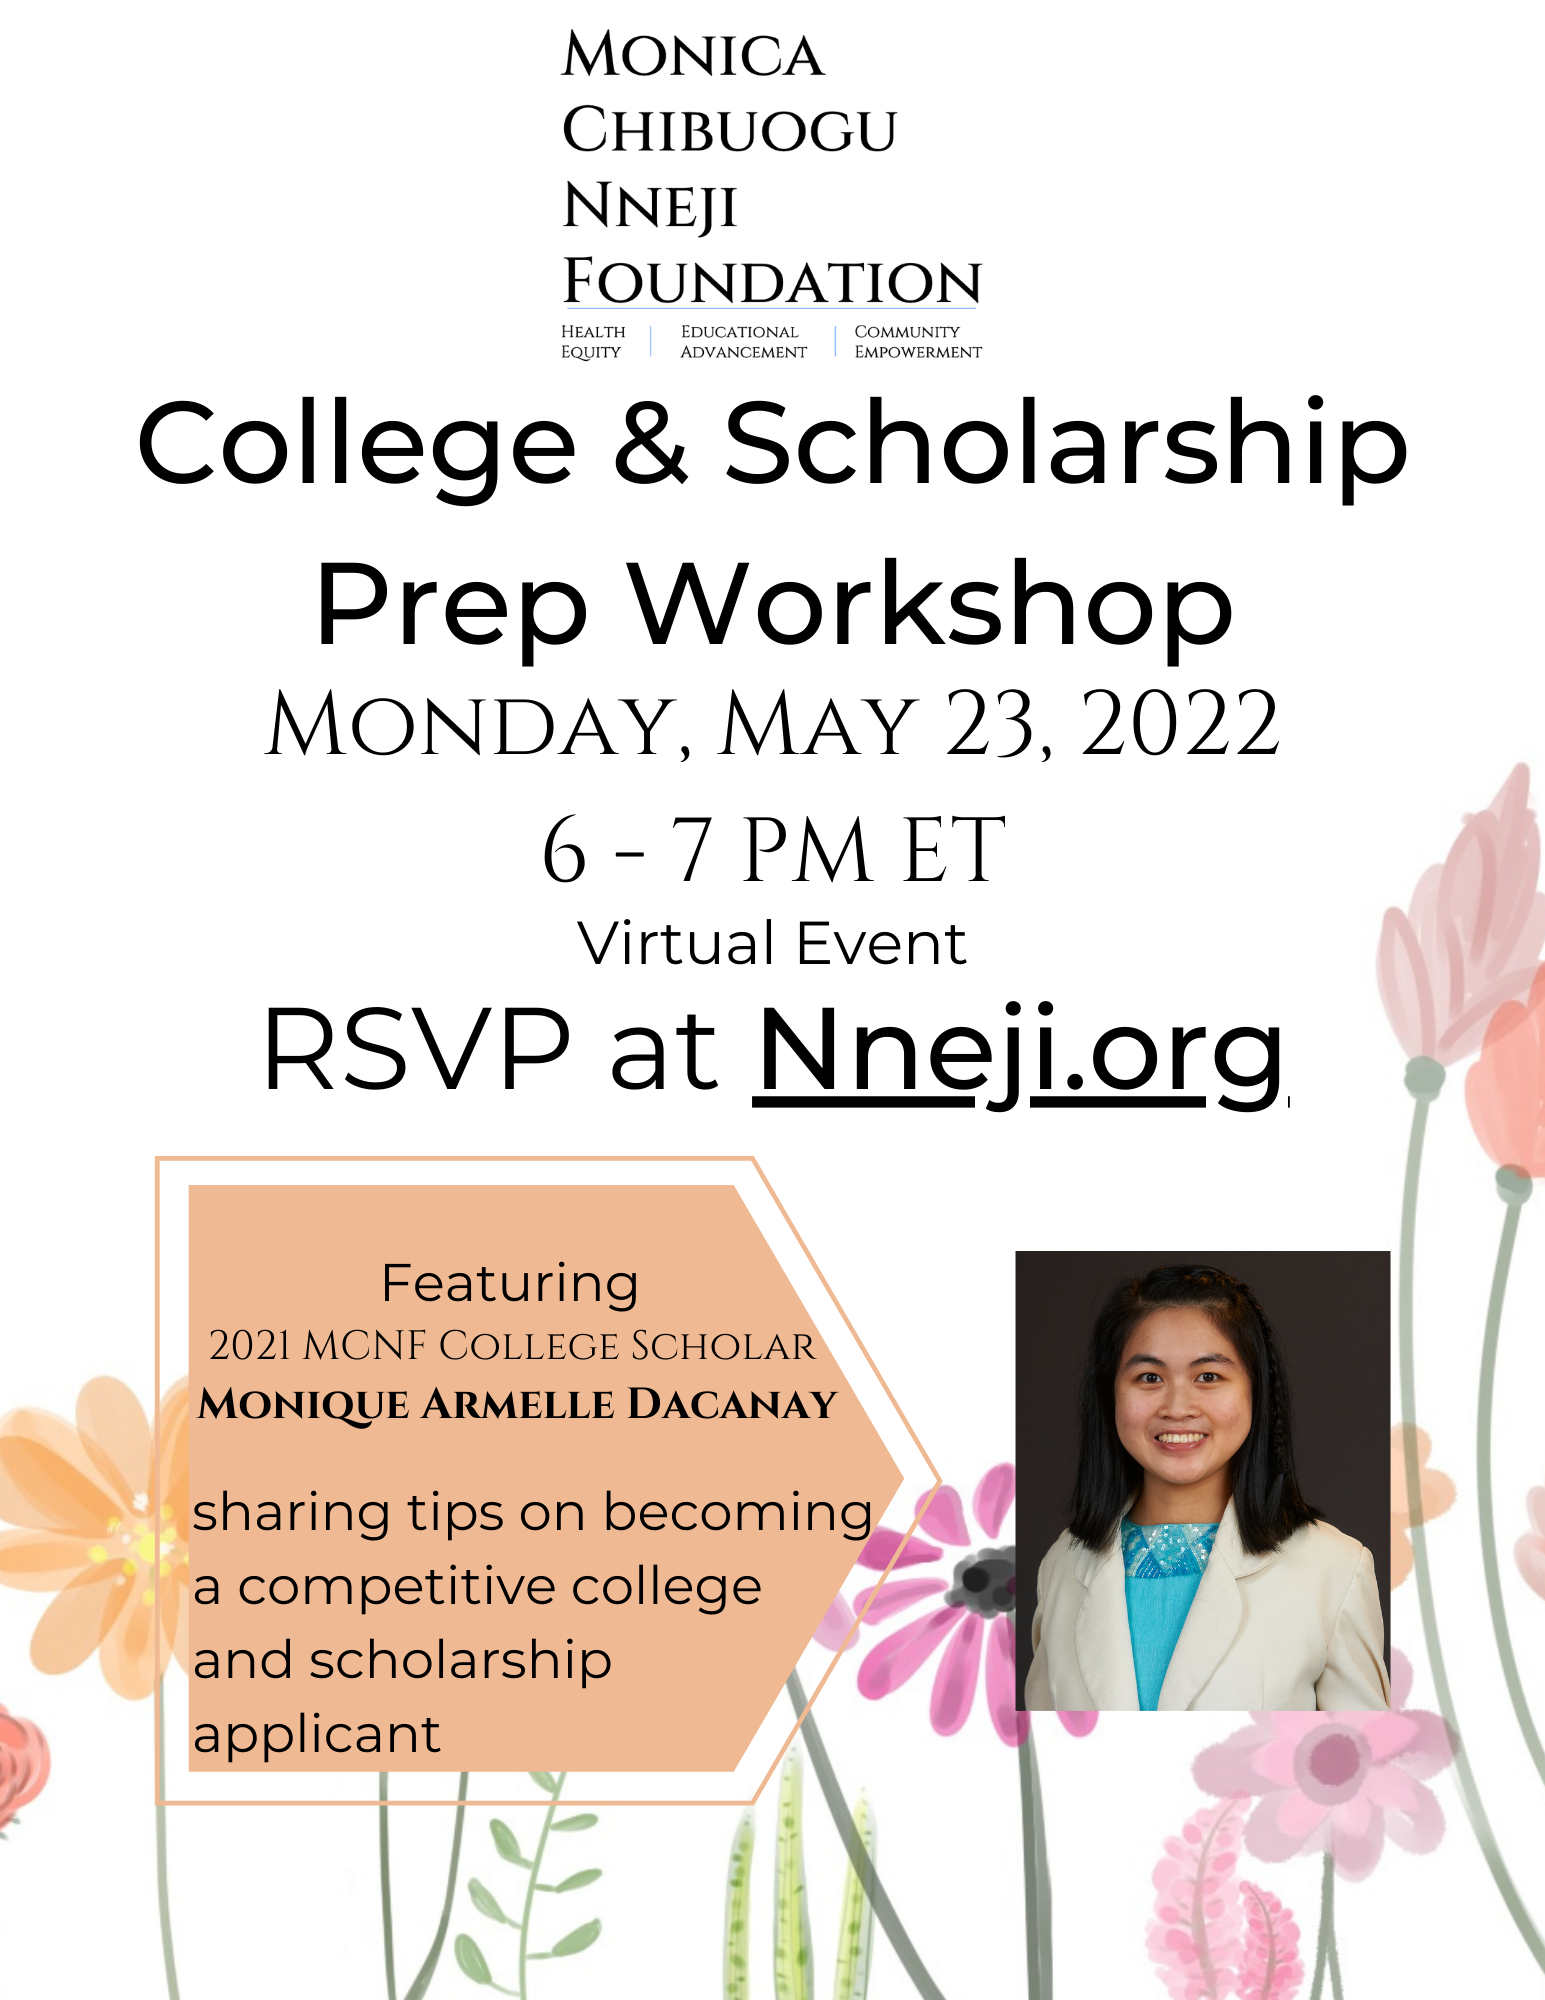 2022 MCNF College & Scholarship Prep Workshop Flyer featuring 2021 MCNF College Scholar Monique Armelle Dacanay